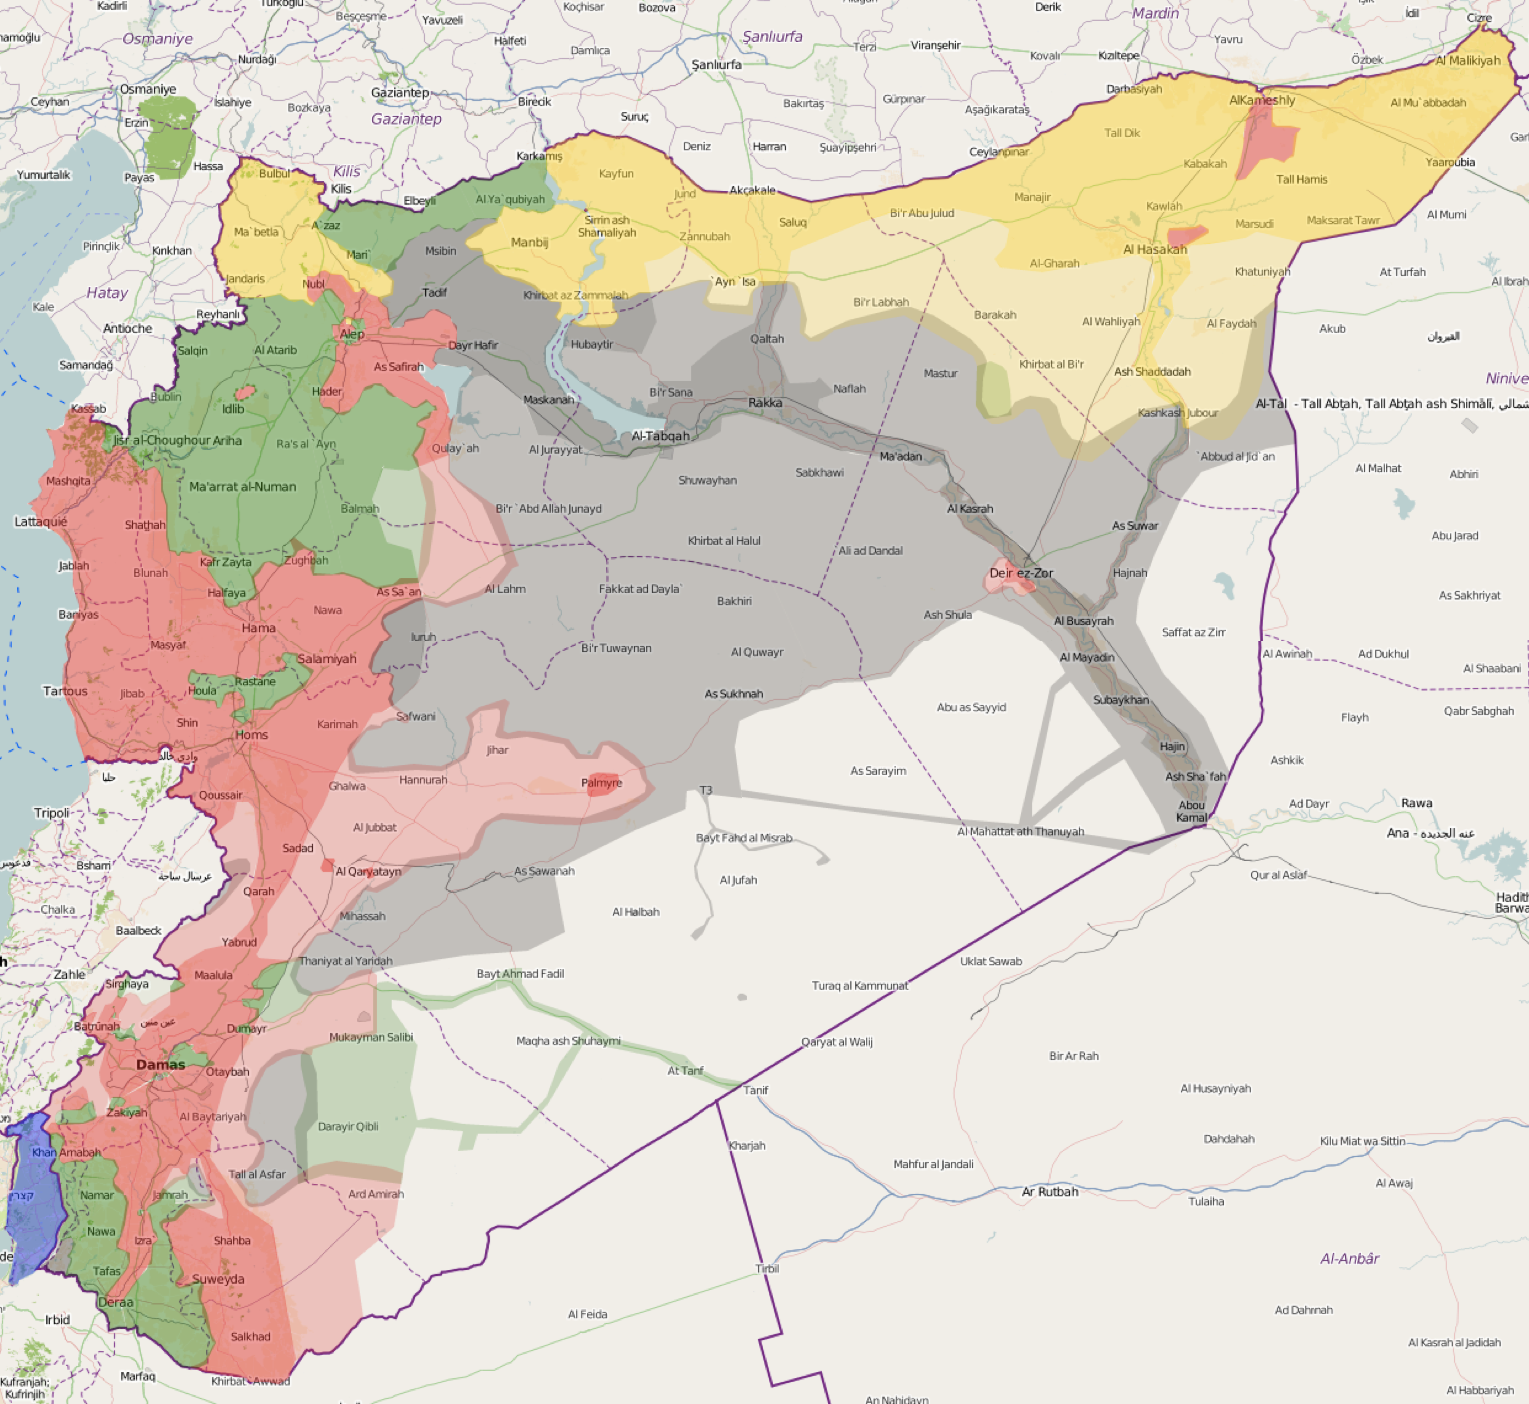 Syria Conflict Map